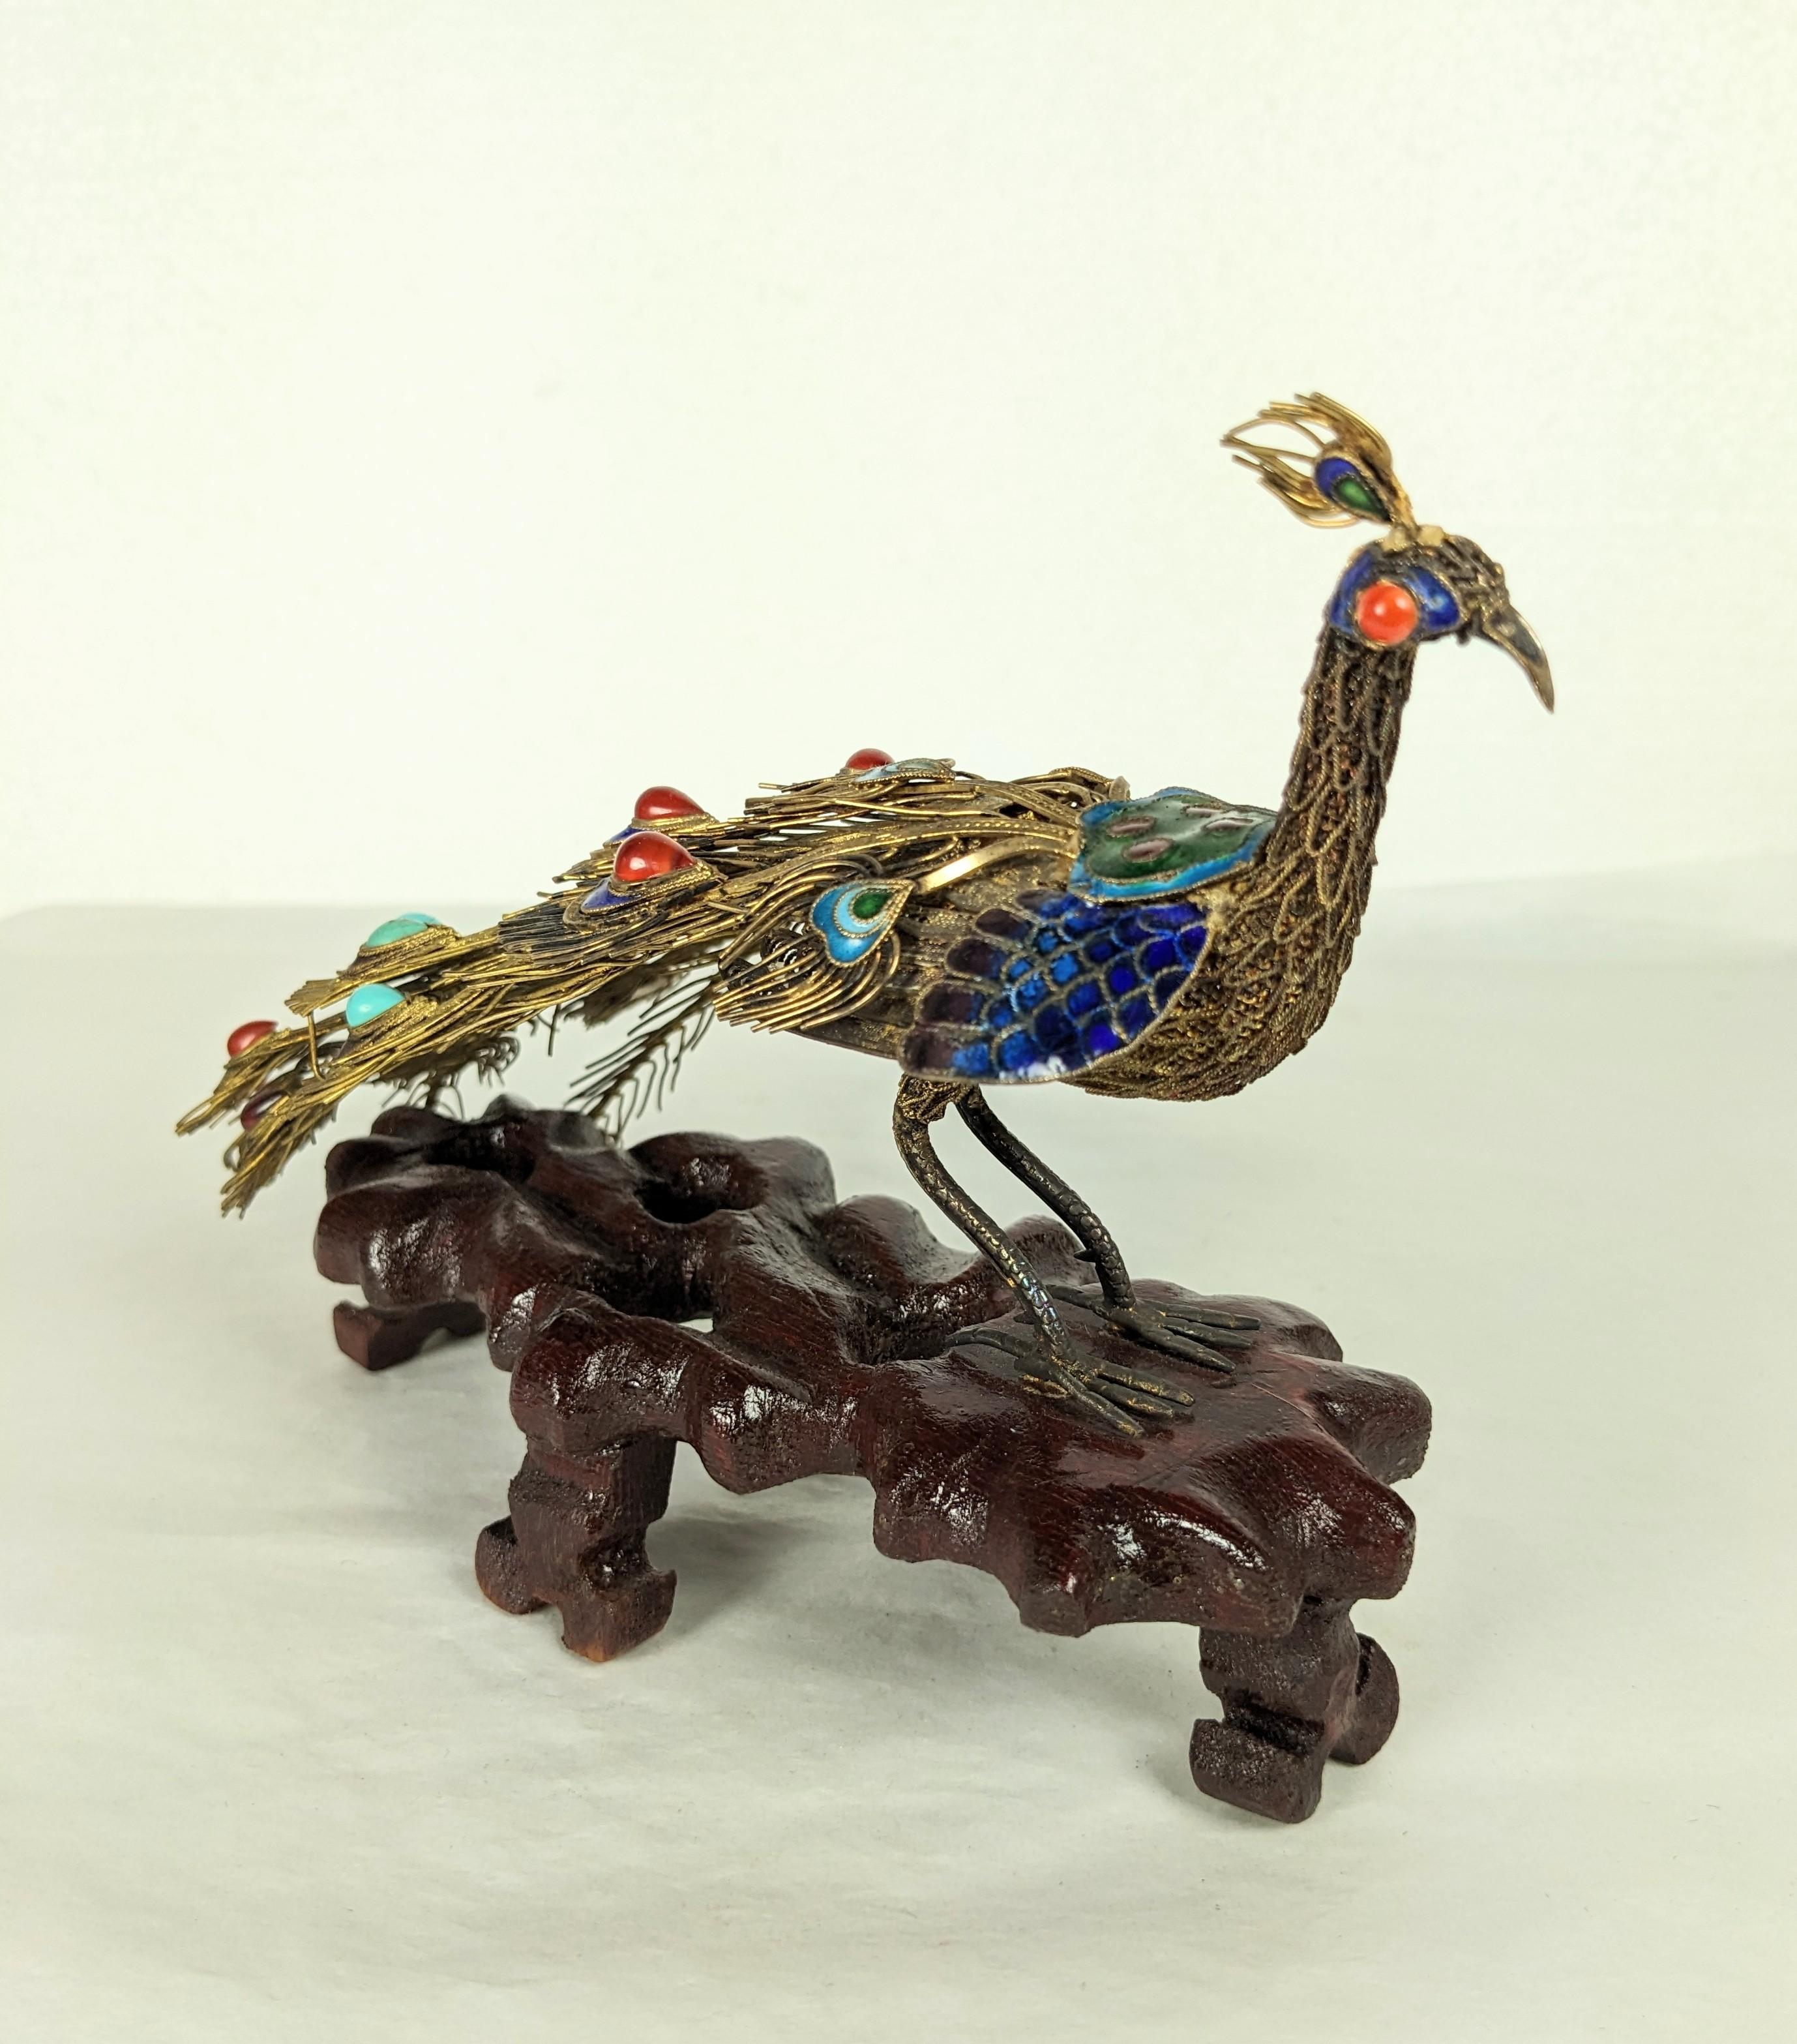 Antique Chinese Silver Gilt and Enamel Peacock from the 1940's on hand carved wood stand. Delicately constructed of vermeil sterling with colorful cloisonne enamel accents. Highlighted with semiprecious coral, turquoise and carnelian stones. 7